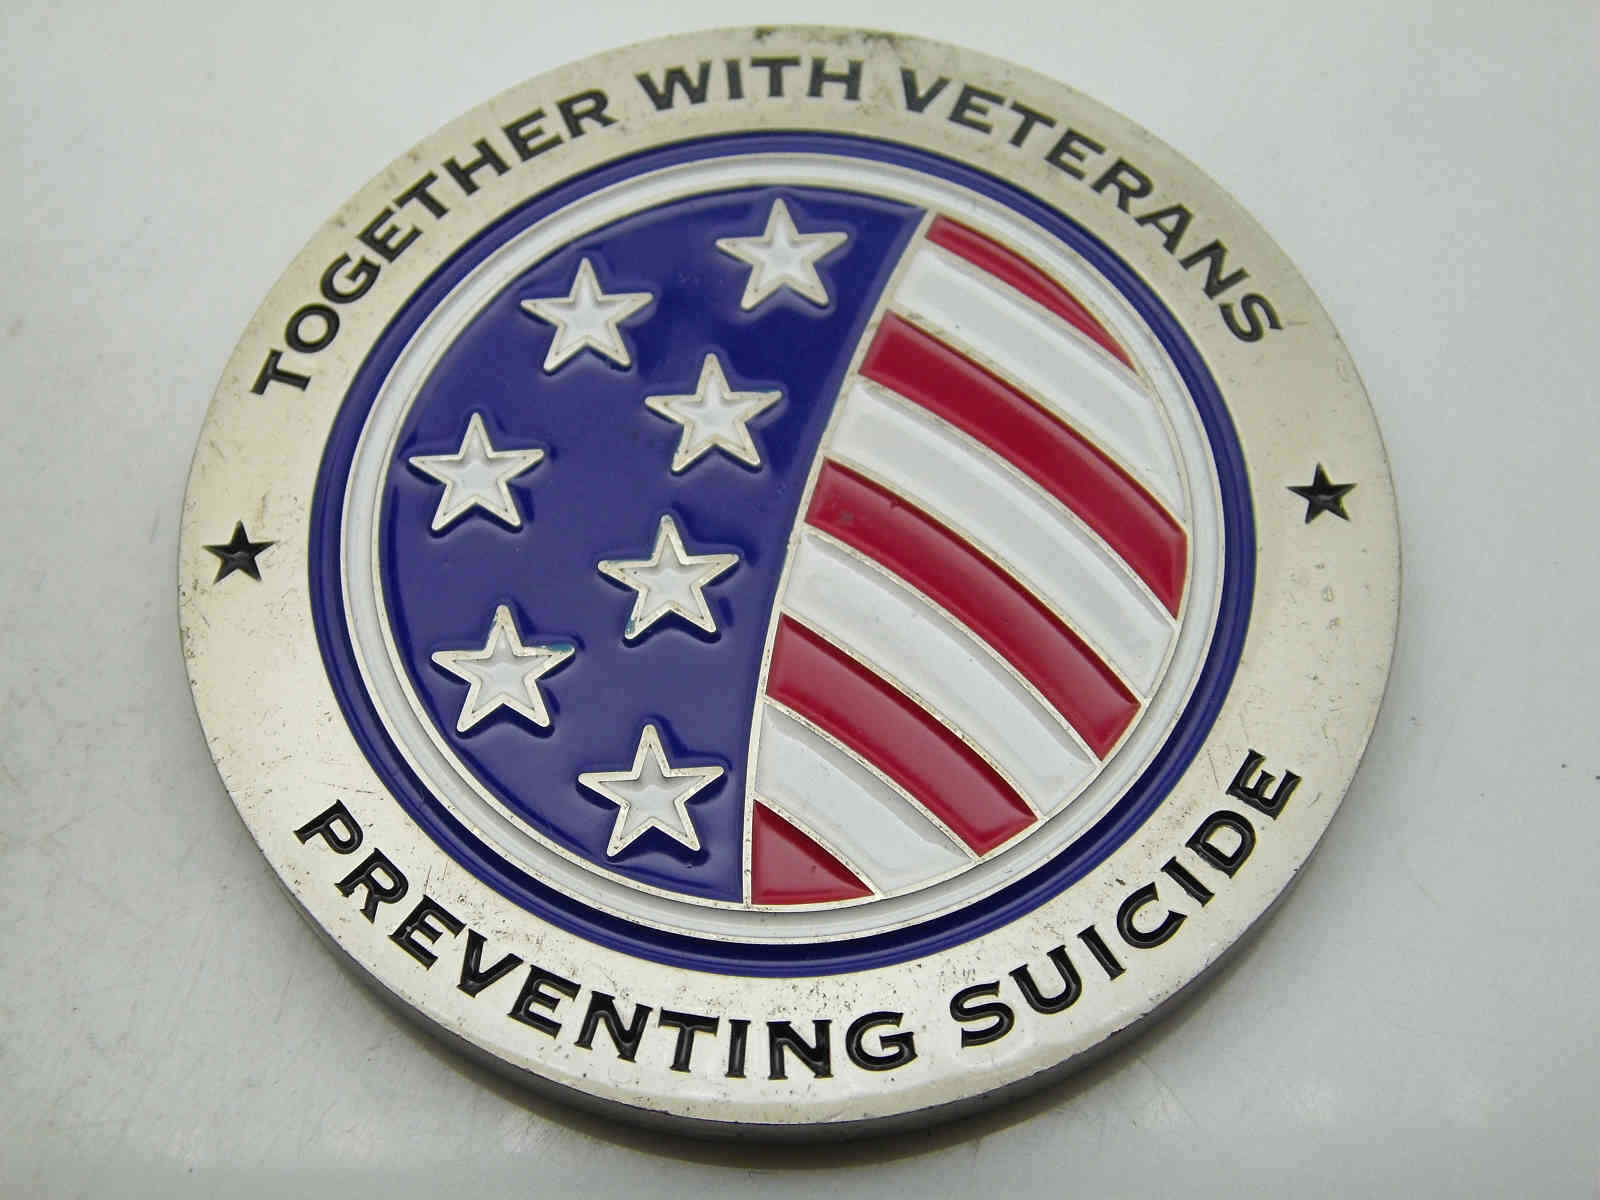 HELPING TOGETHER WITH VETERANS PREVENTING SUICIDE CHALLENGE COIN